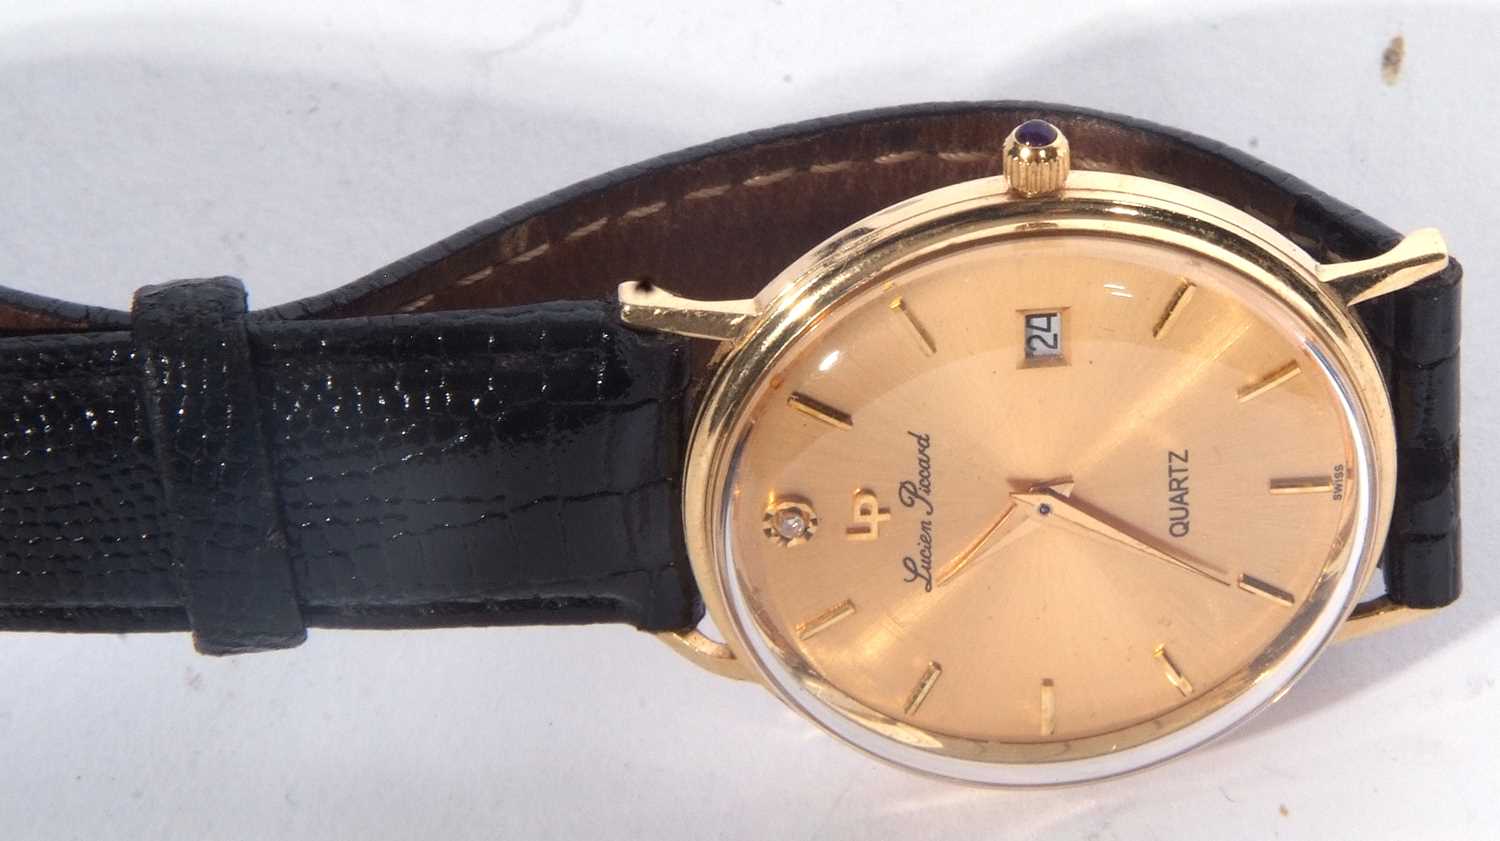 Lucien Picard 14ct gold gents wrist watch, the watch marked on back of case for 14ct gold, gold - Image 4 of 4